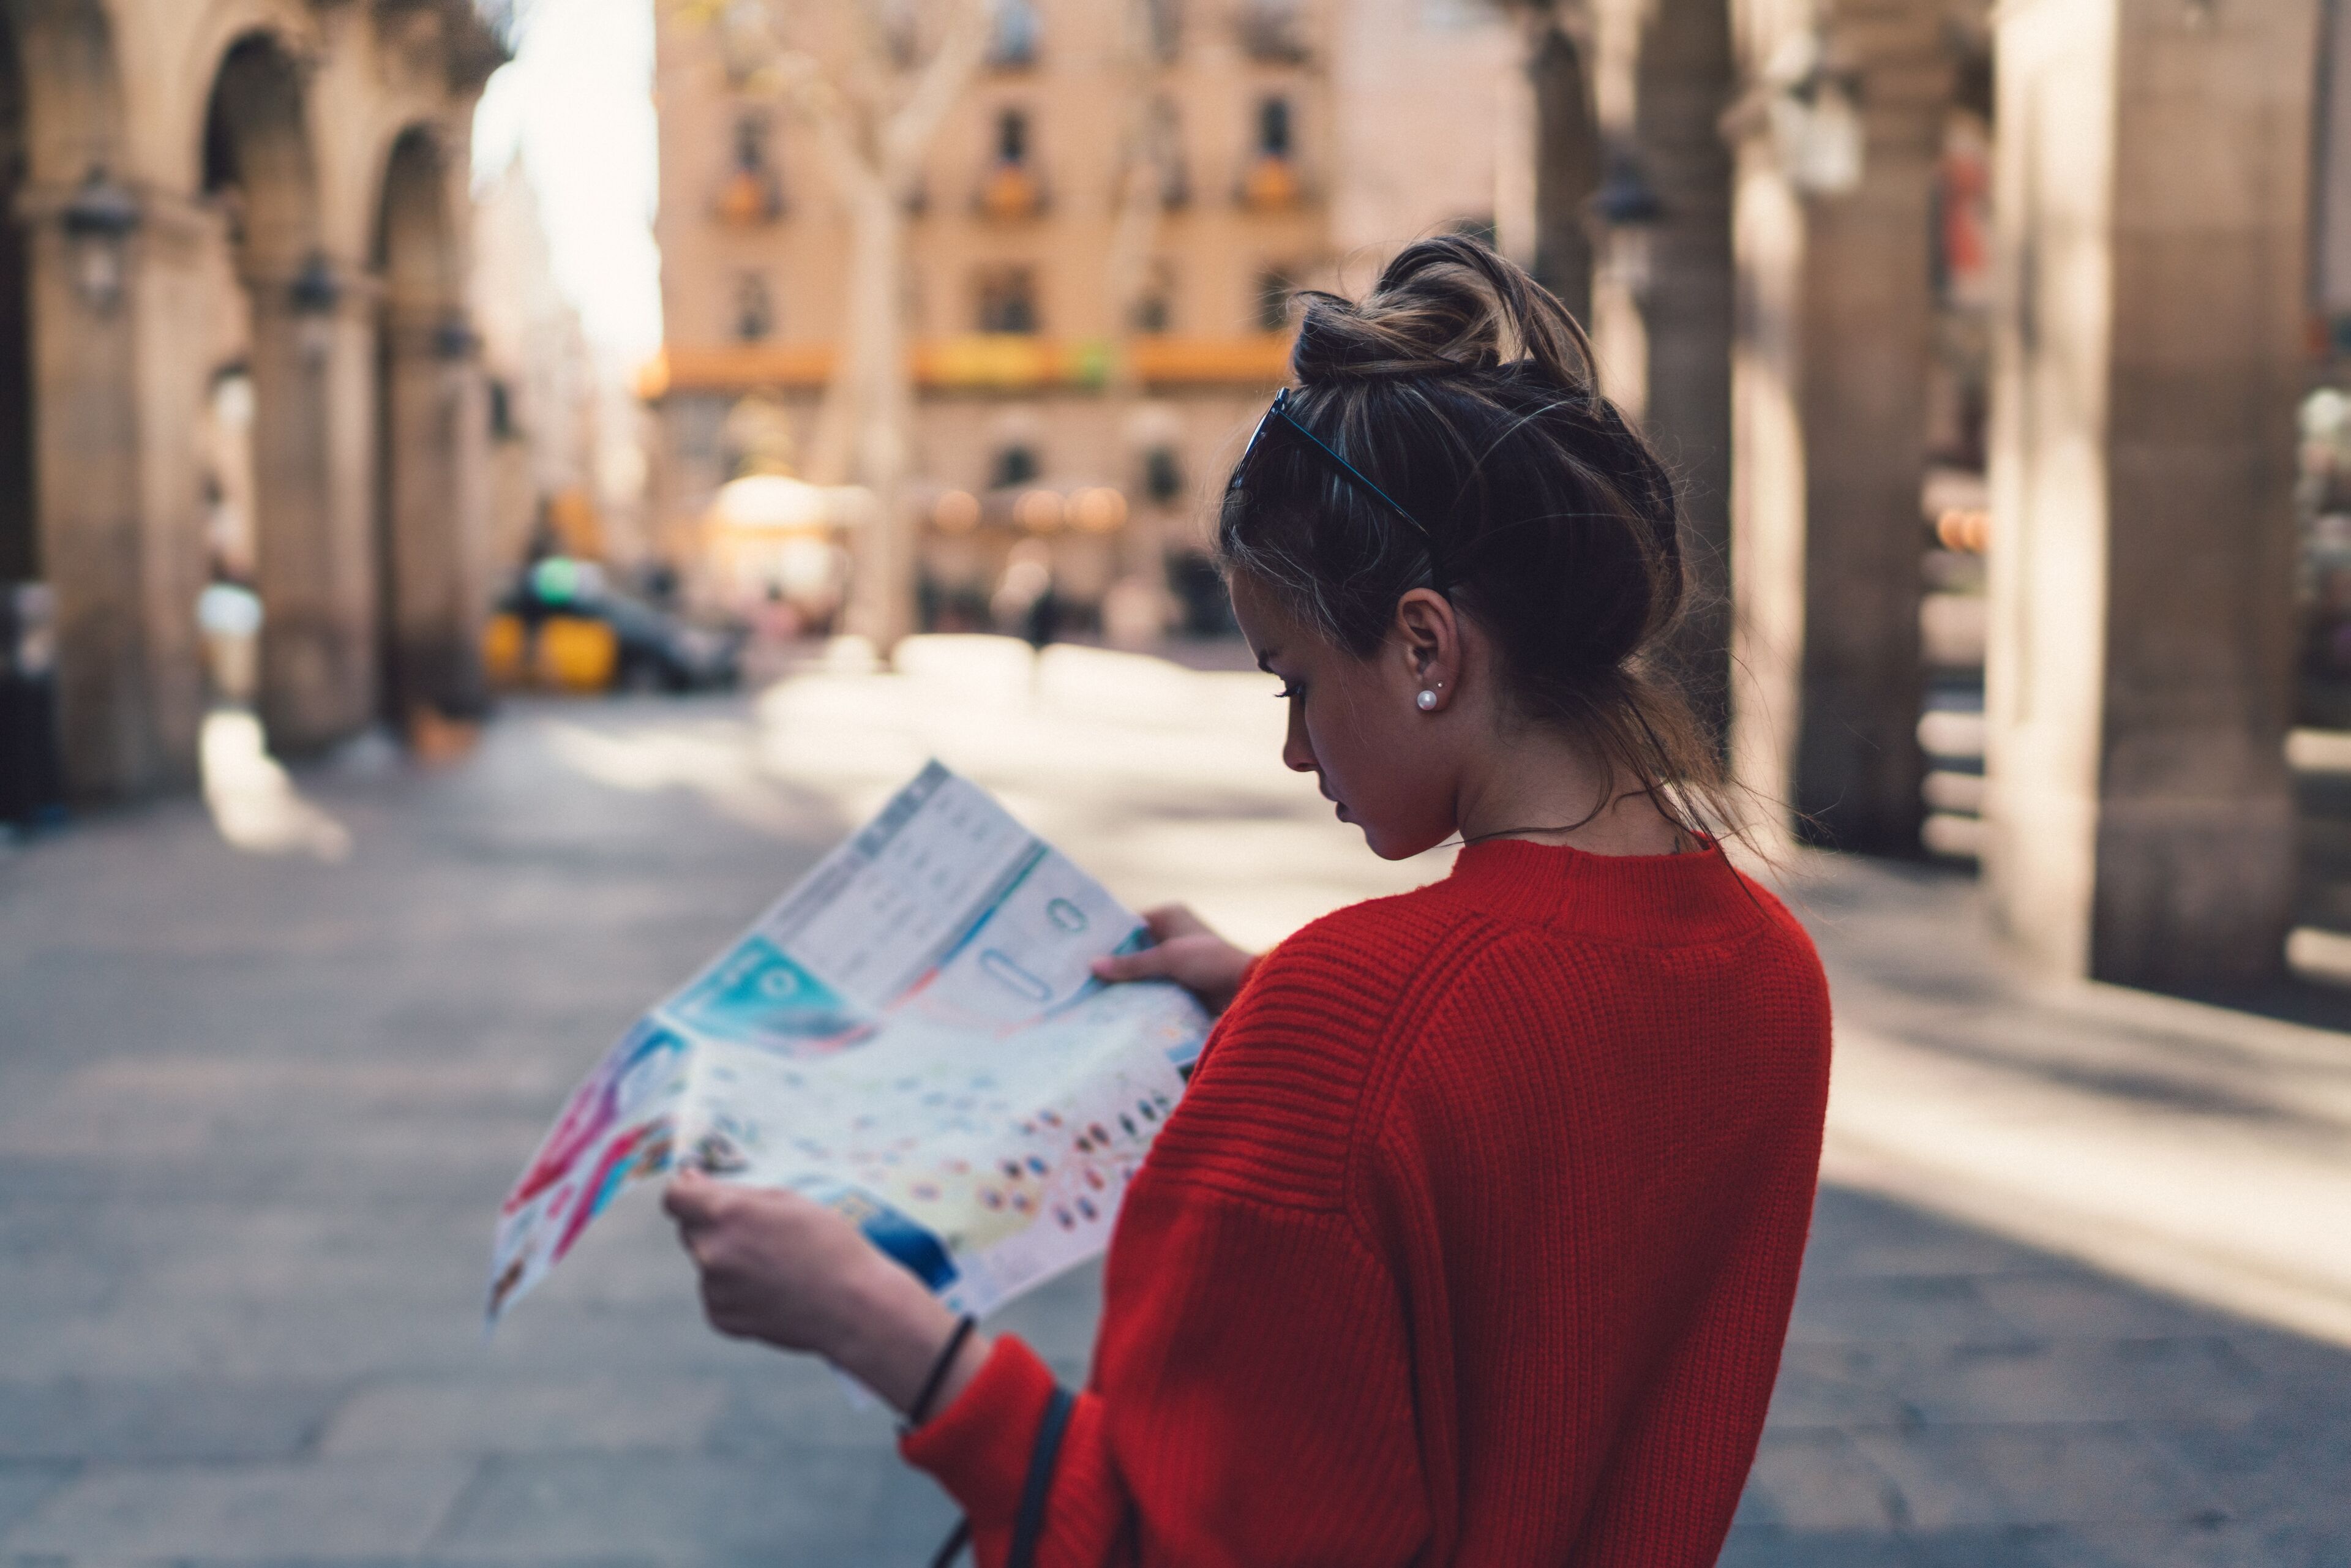 A young woman in a vibrant red sweater studies a map attentively, standing on a cobbled street with historical architecture blurred in the background.